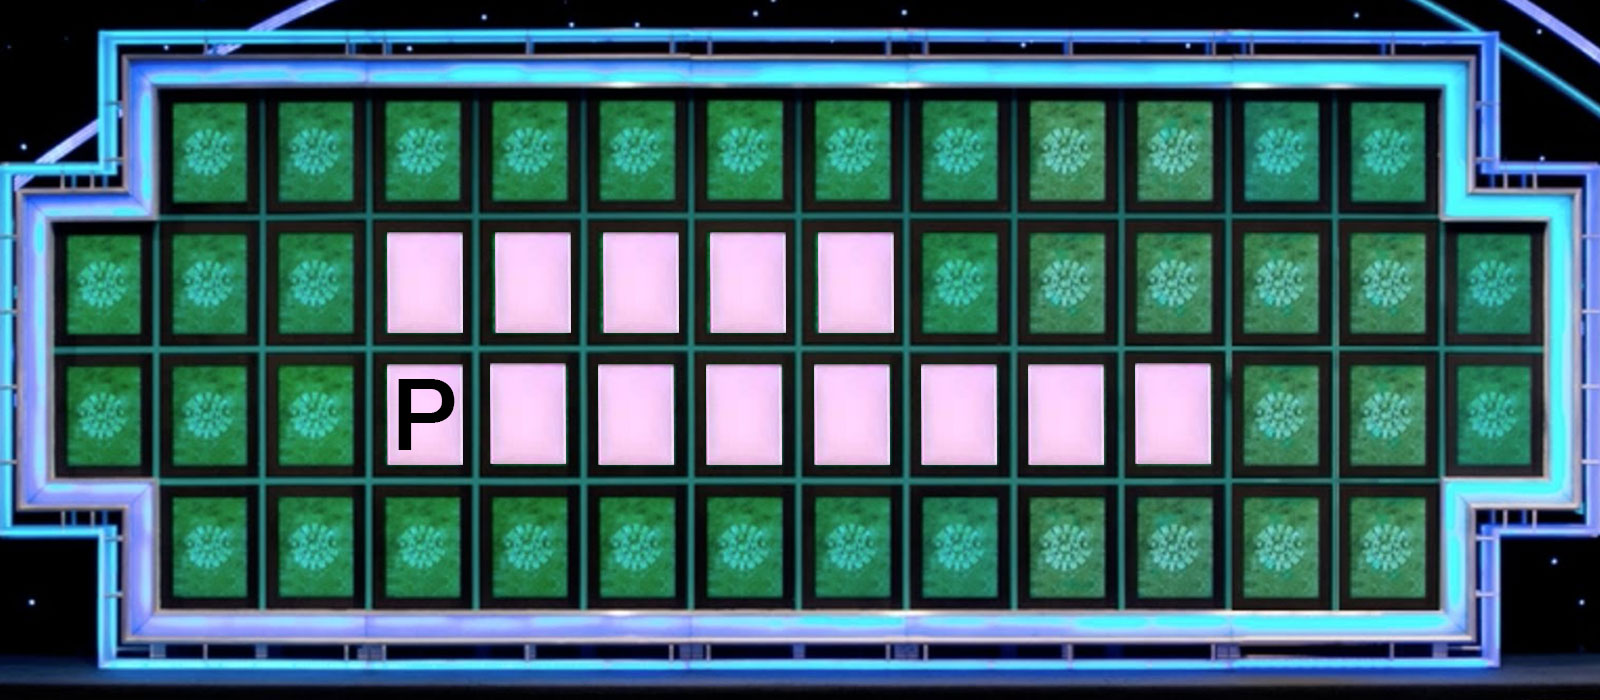 Can You Solve These Wheel of Fortune Puzzles? 915